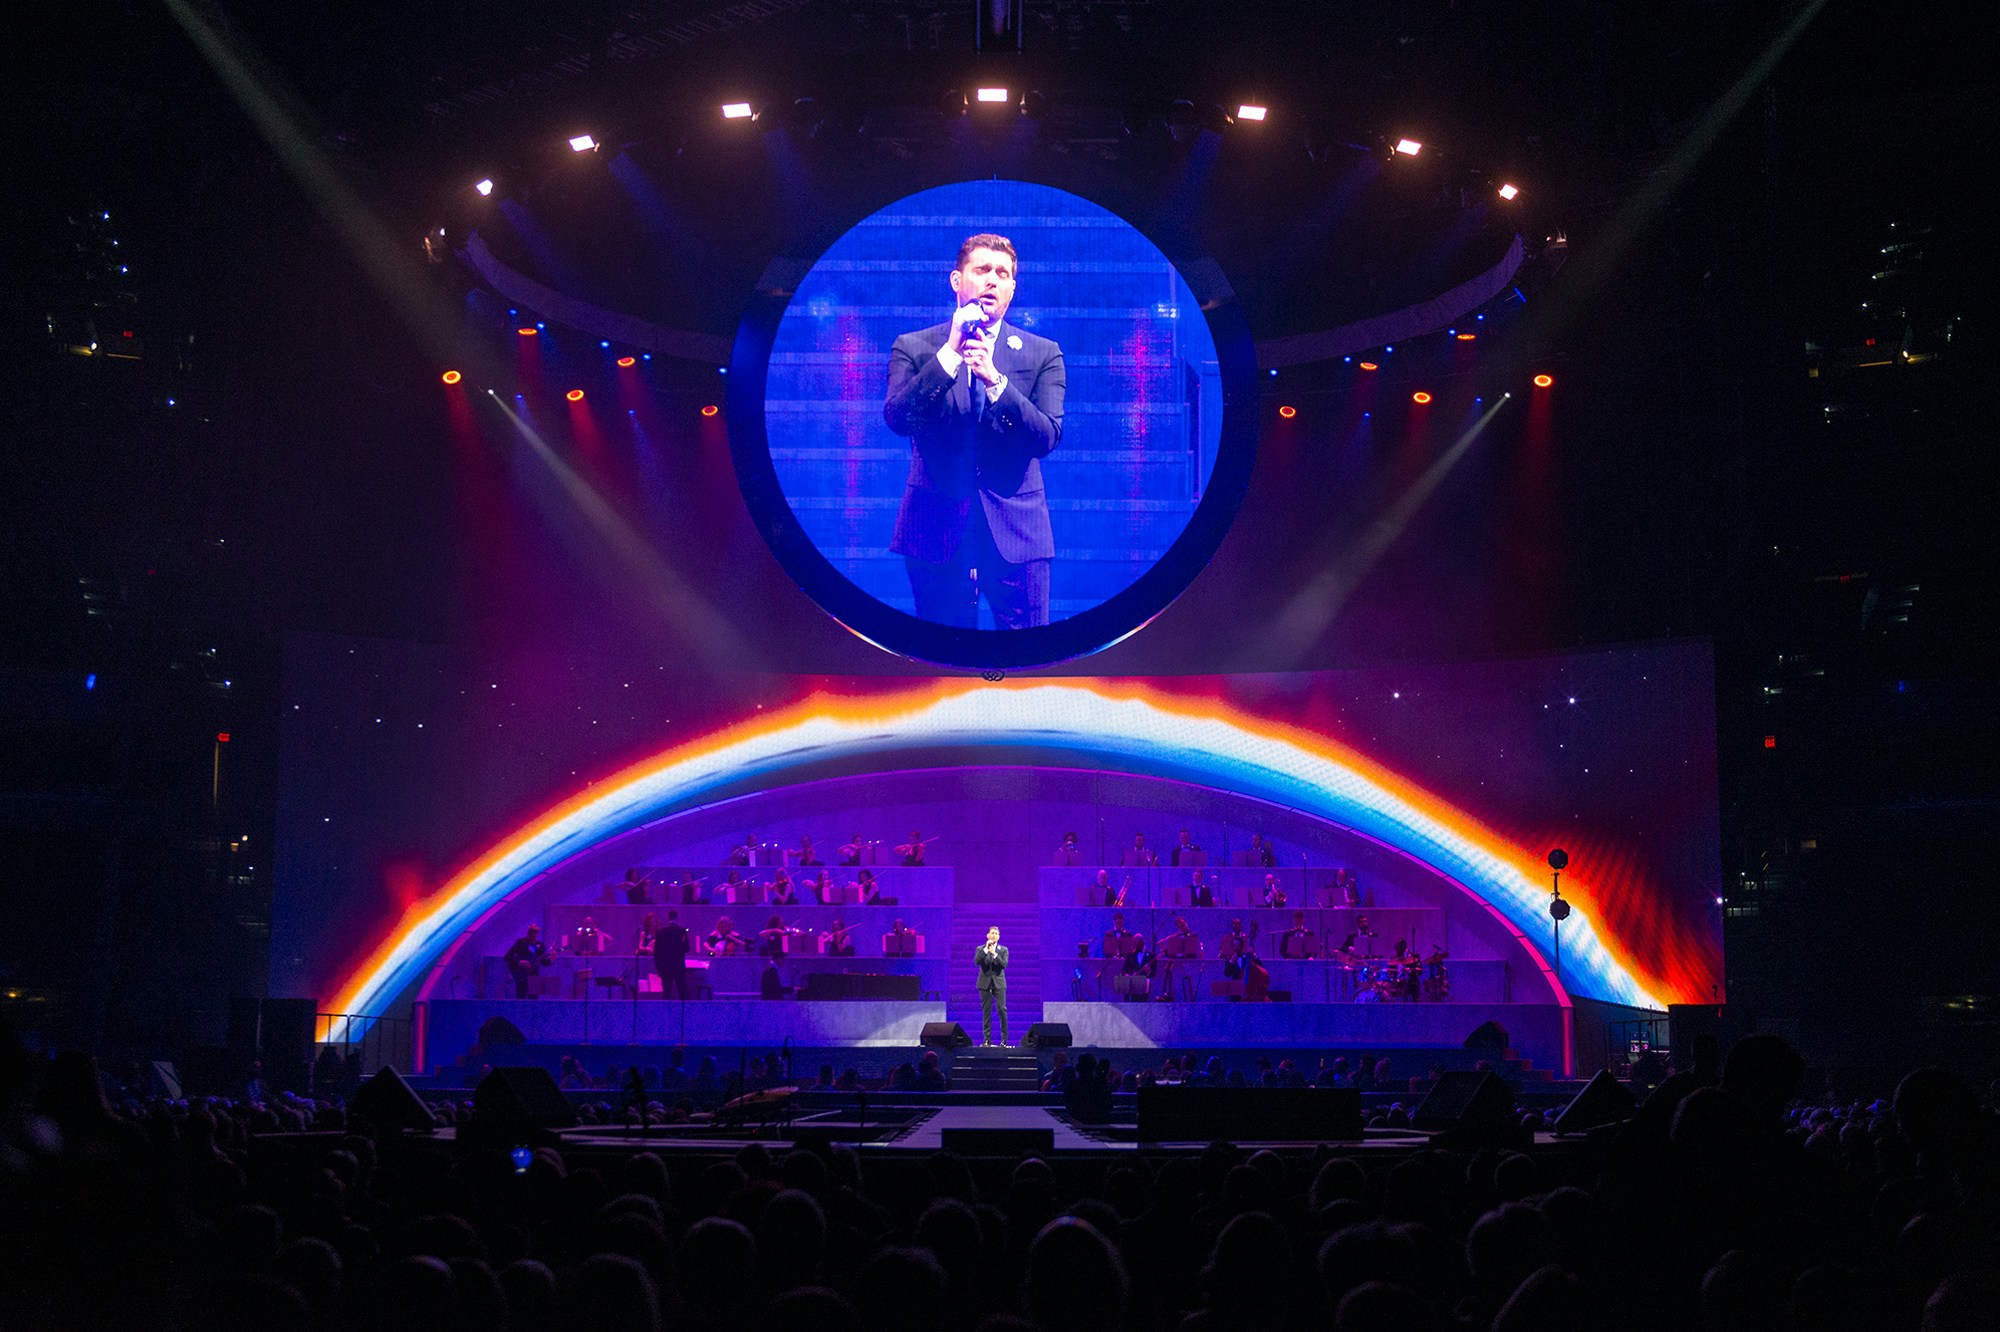  Michael Bublé Love world on fire stage shot